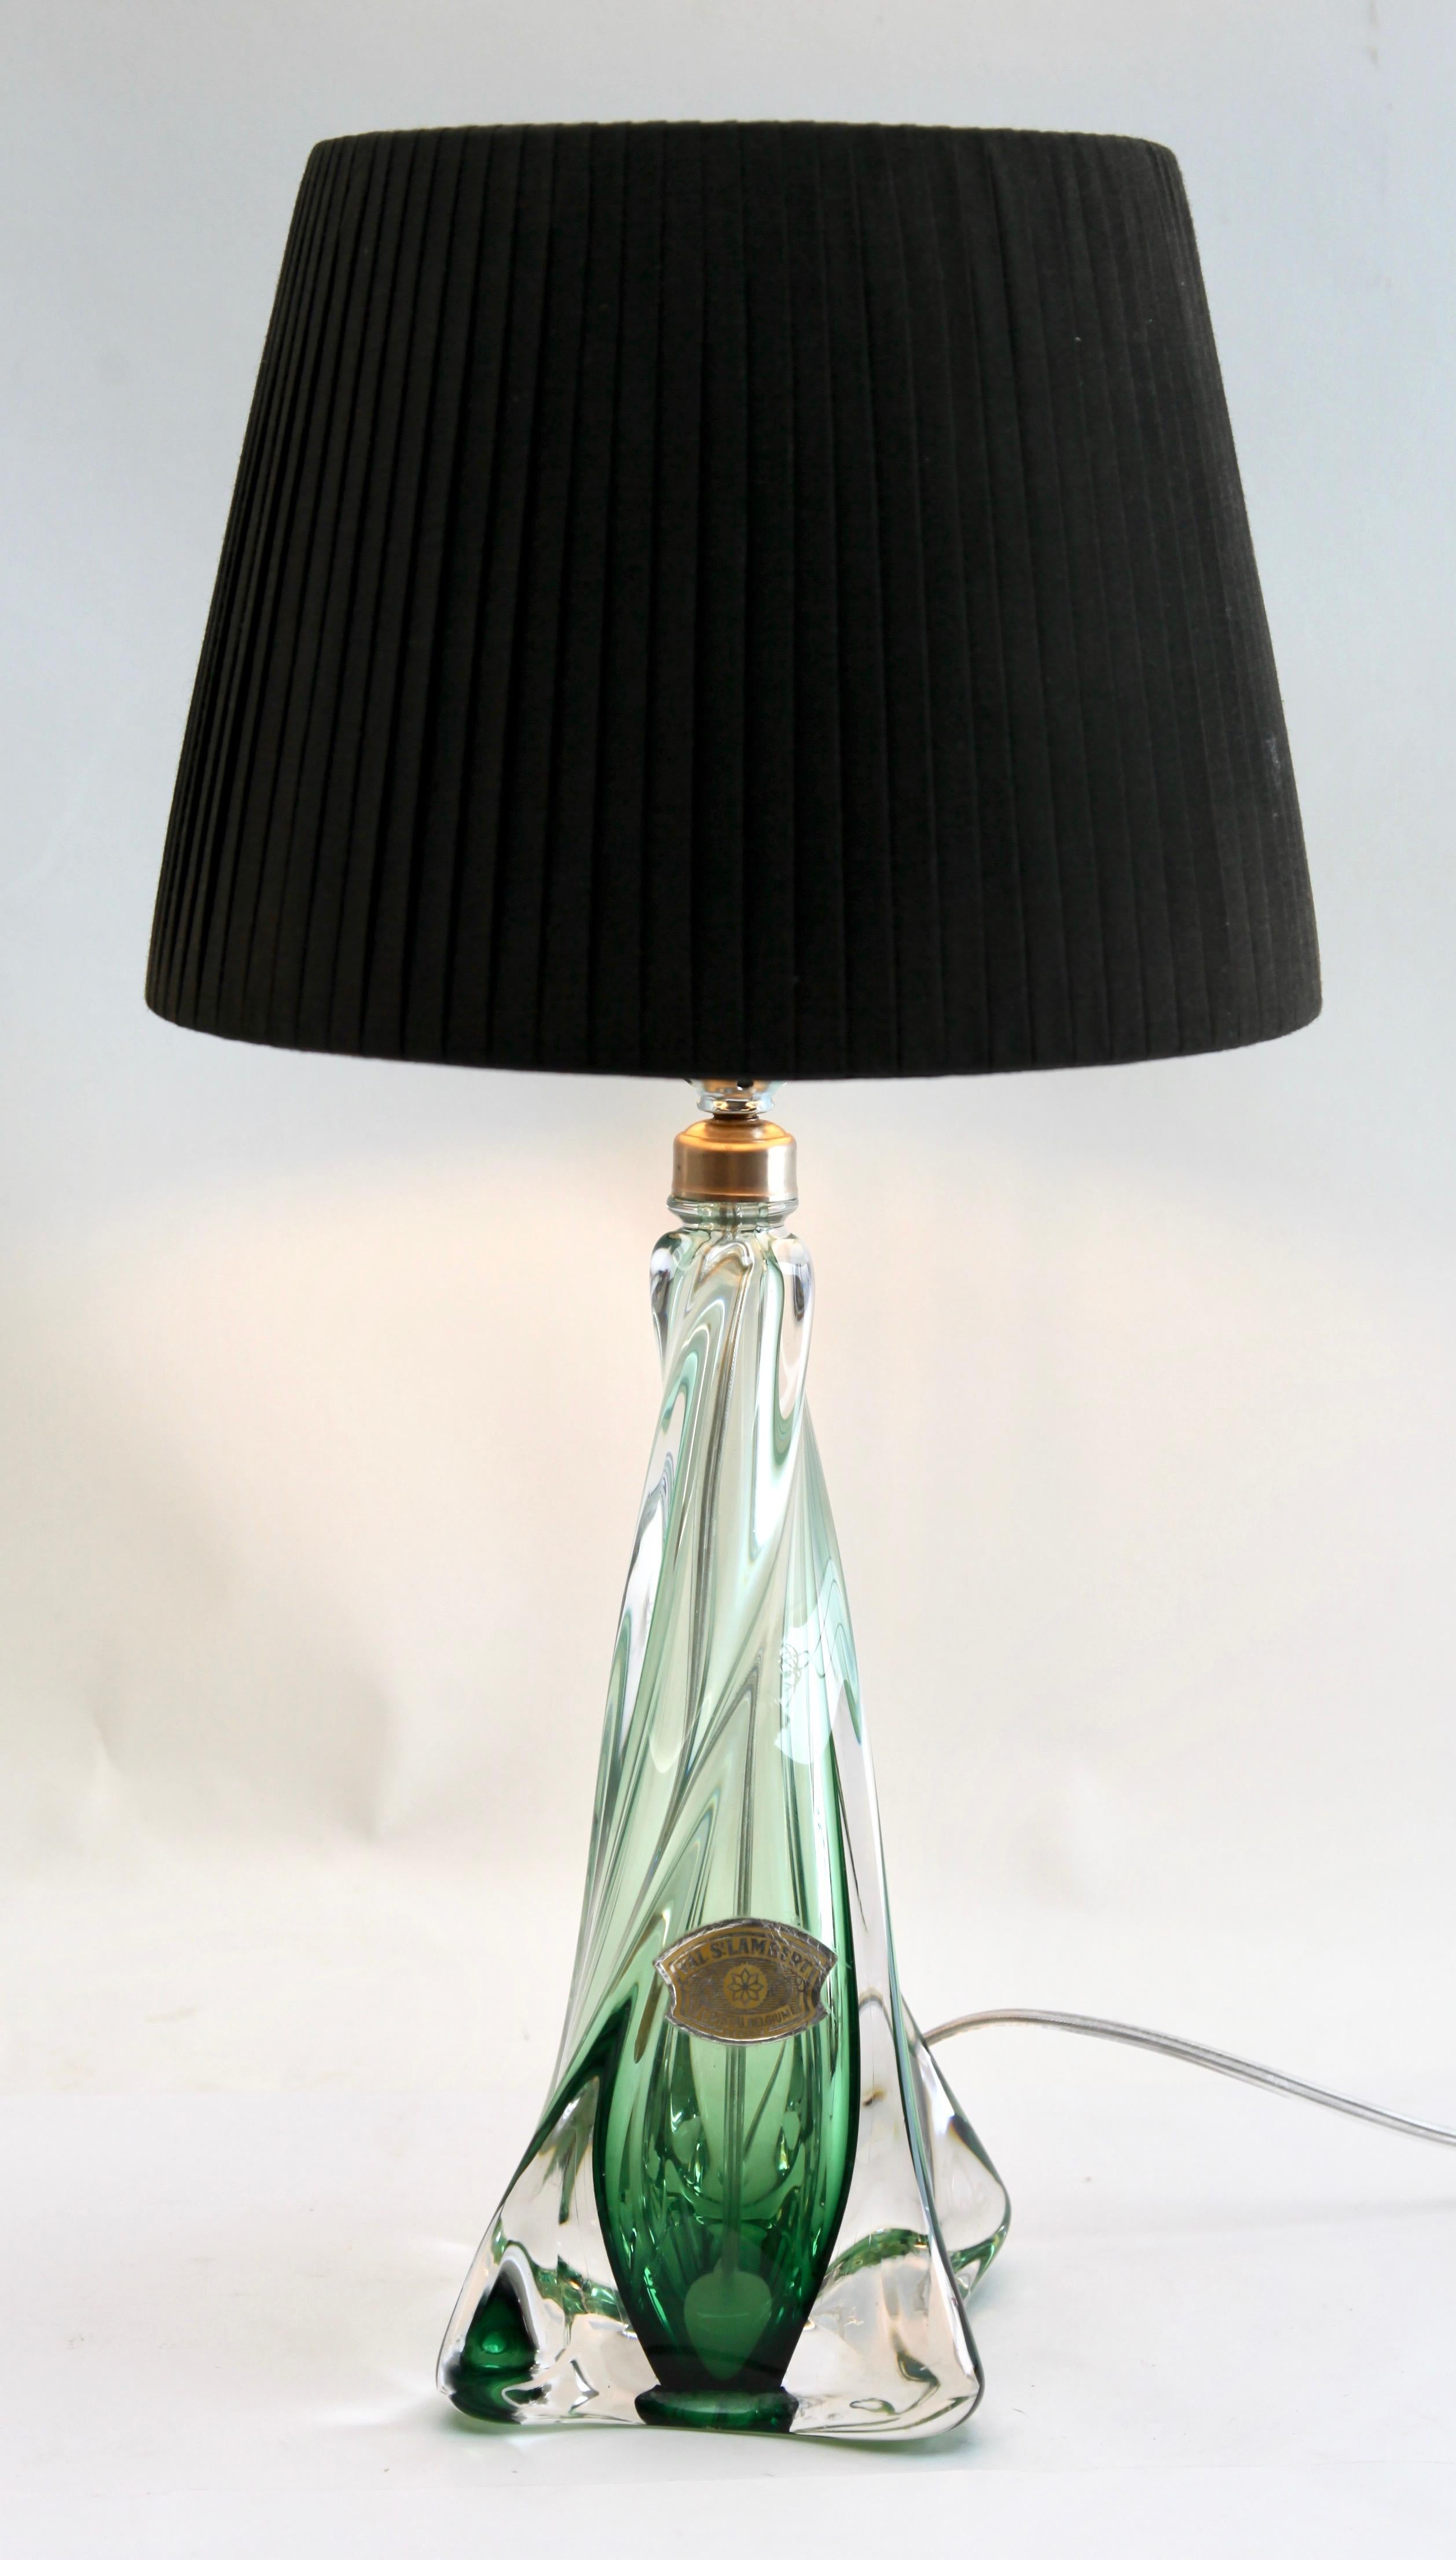 Pair Val Saint Lambert
This simple yet graceful green table lamp is in medium size: 13 inches excluding the lamp-fitting and shade. The colored core in Classic Val Saint Lambert tint has been given a thick Sommerso (clear crystal casing) so that